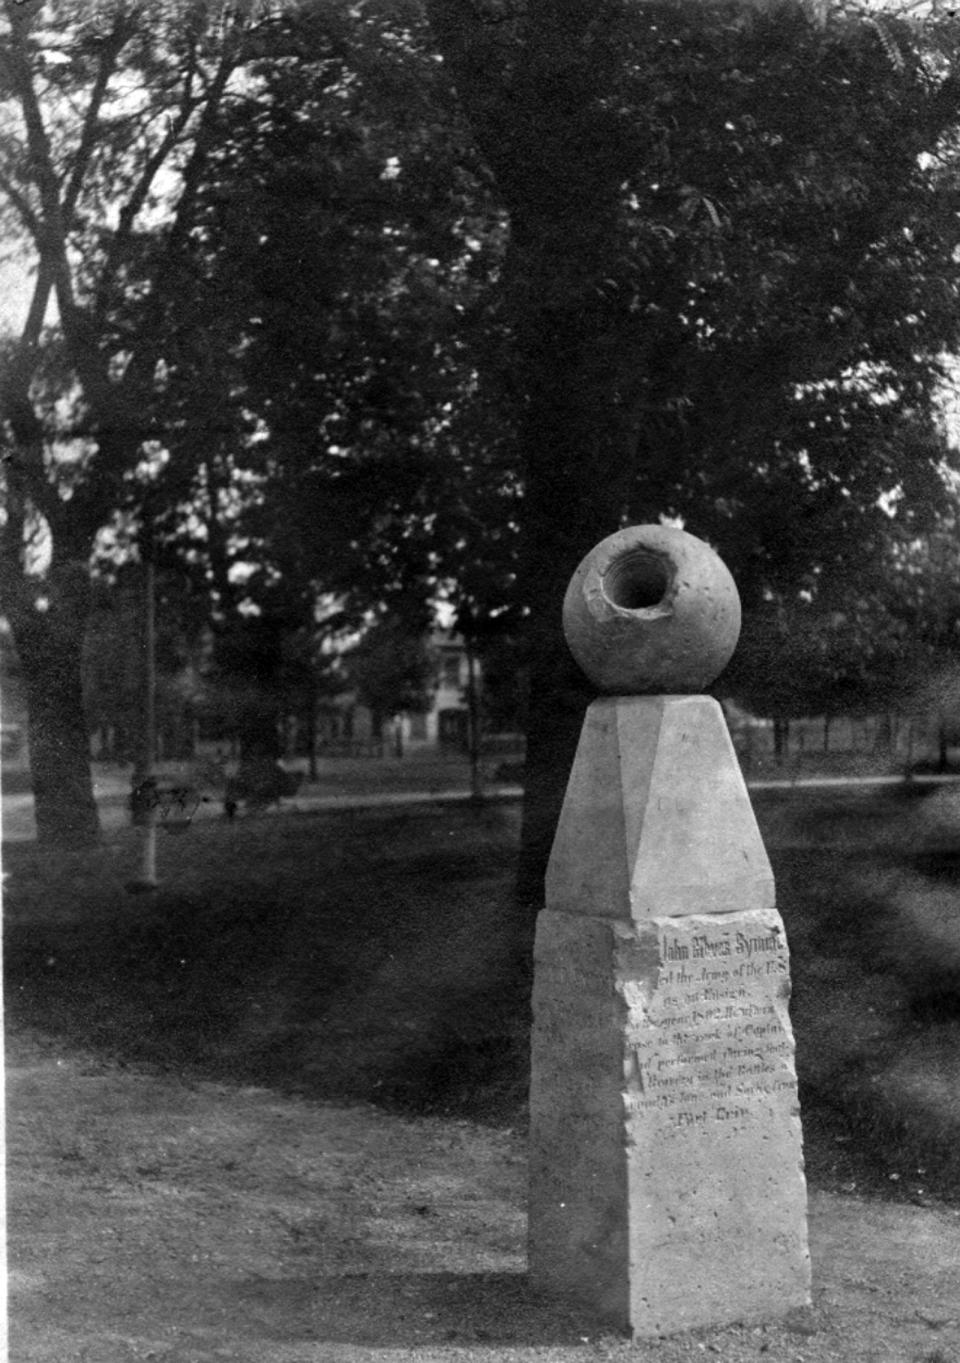 Capt. John Cleves Symmes is remembered in a monument in Hamilton, Ohio, to his belief that the Earth was hollow, as seen in this undated photo.